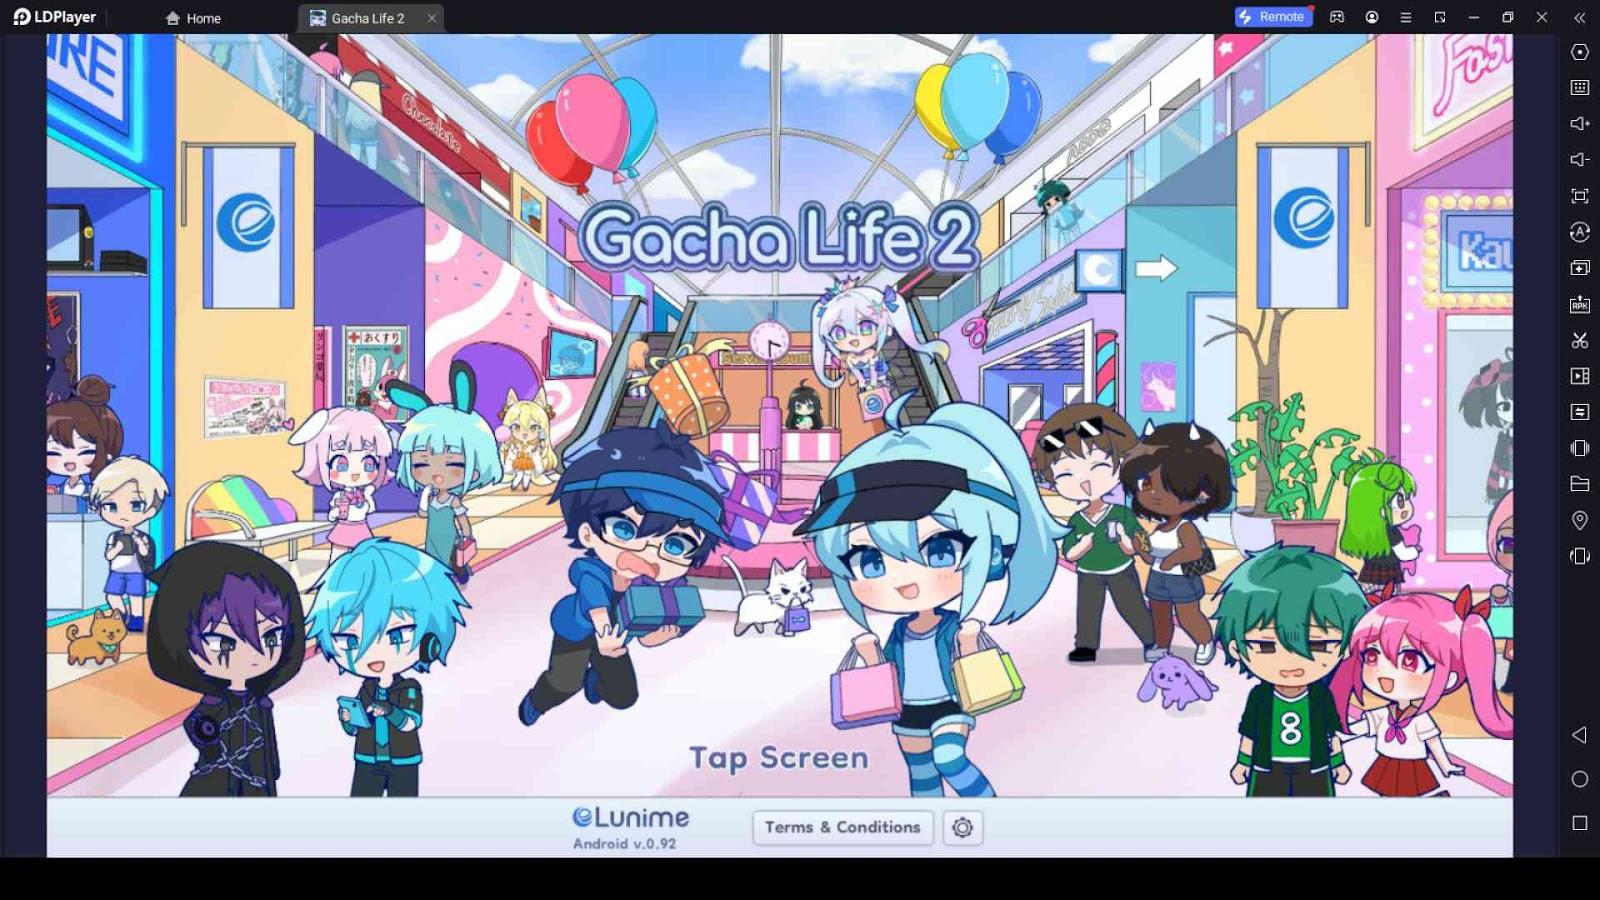 Watch This First Before You Install Gacha Life 2